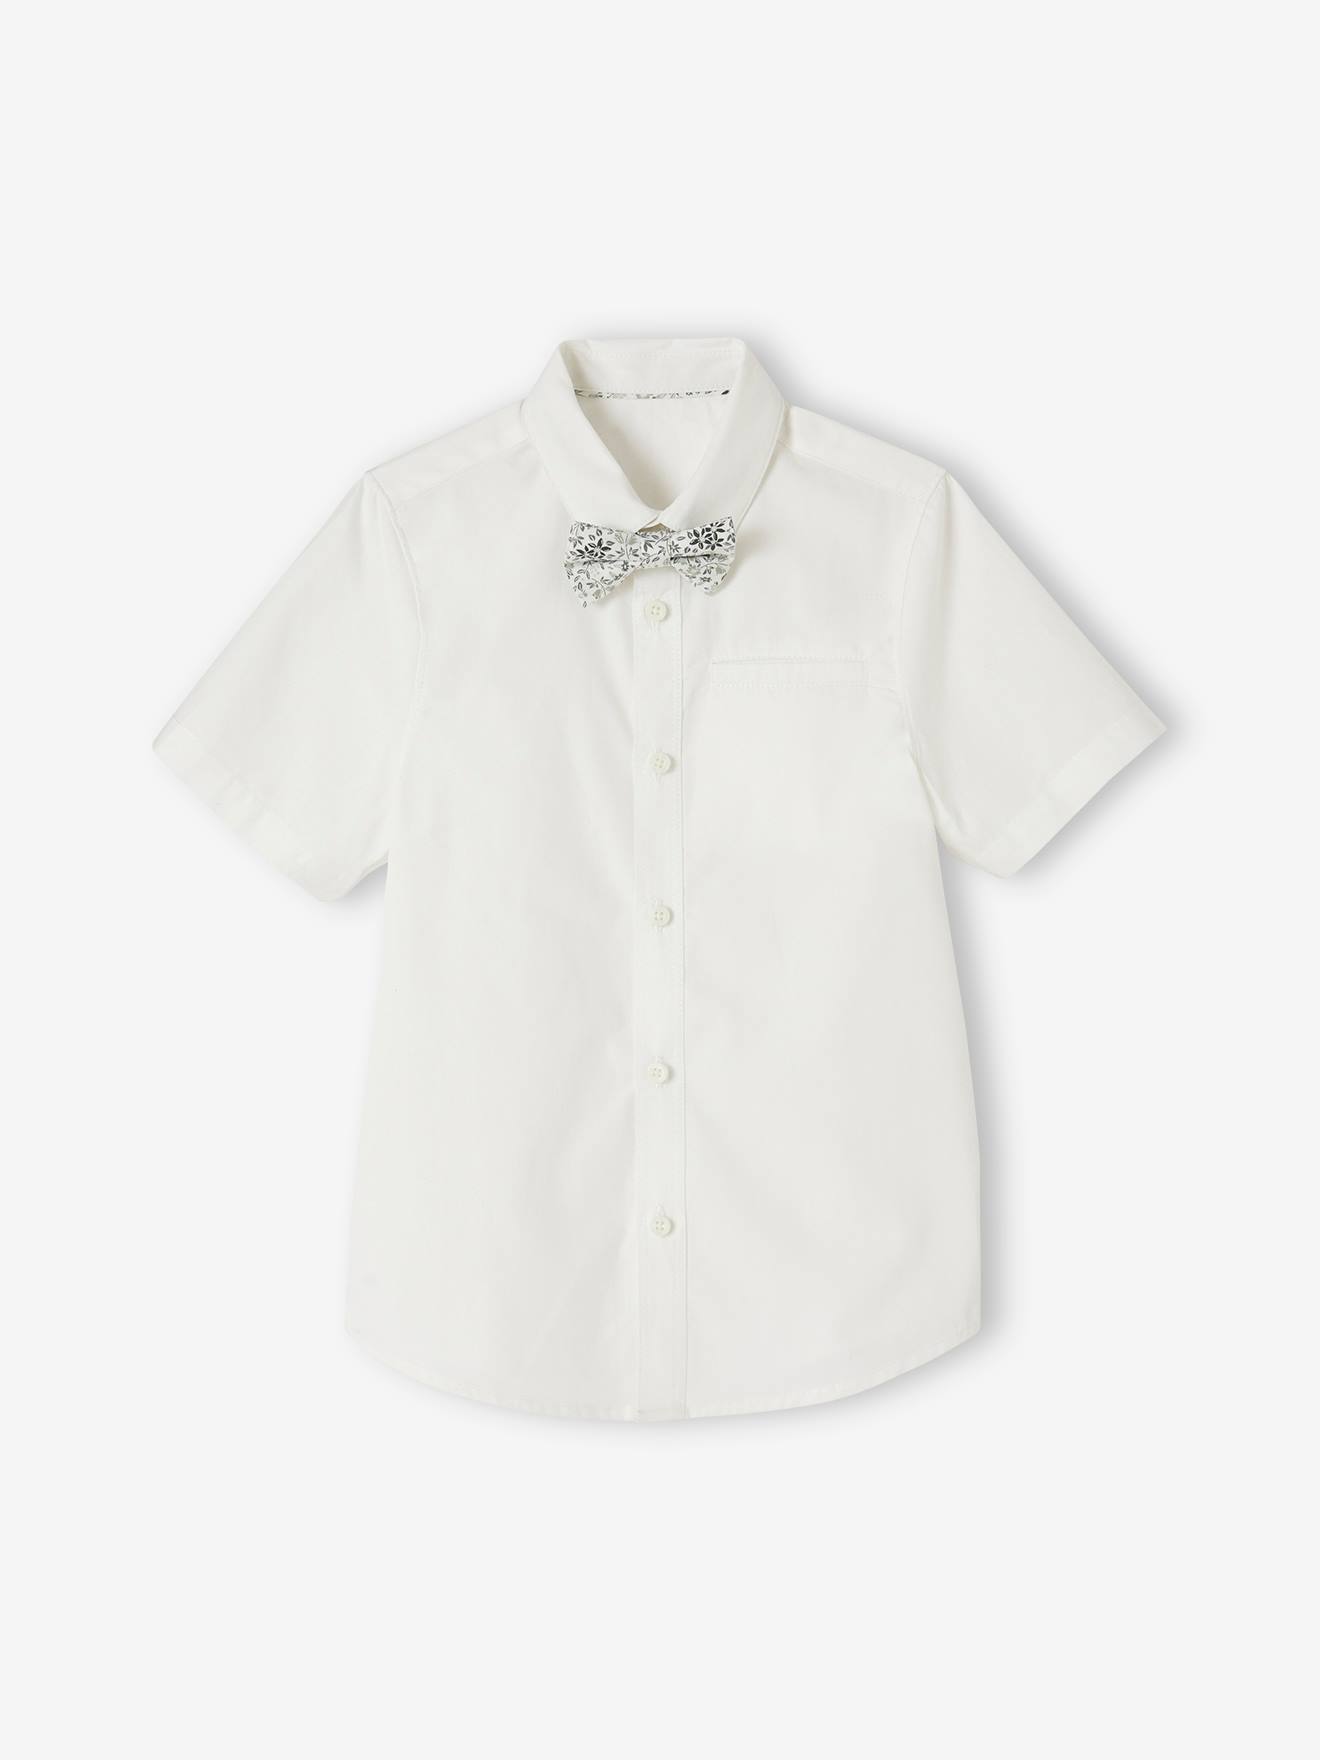 Occasion Wear Shirt, Detachable Bow-Tie, Short Sleeves, for Boys white